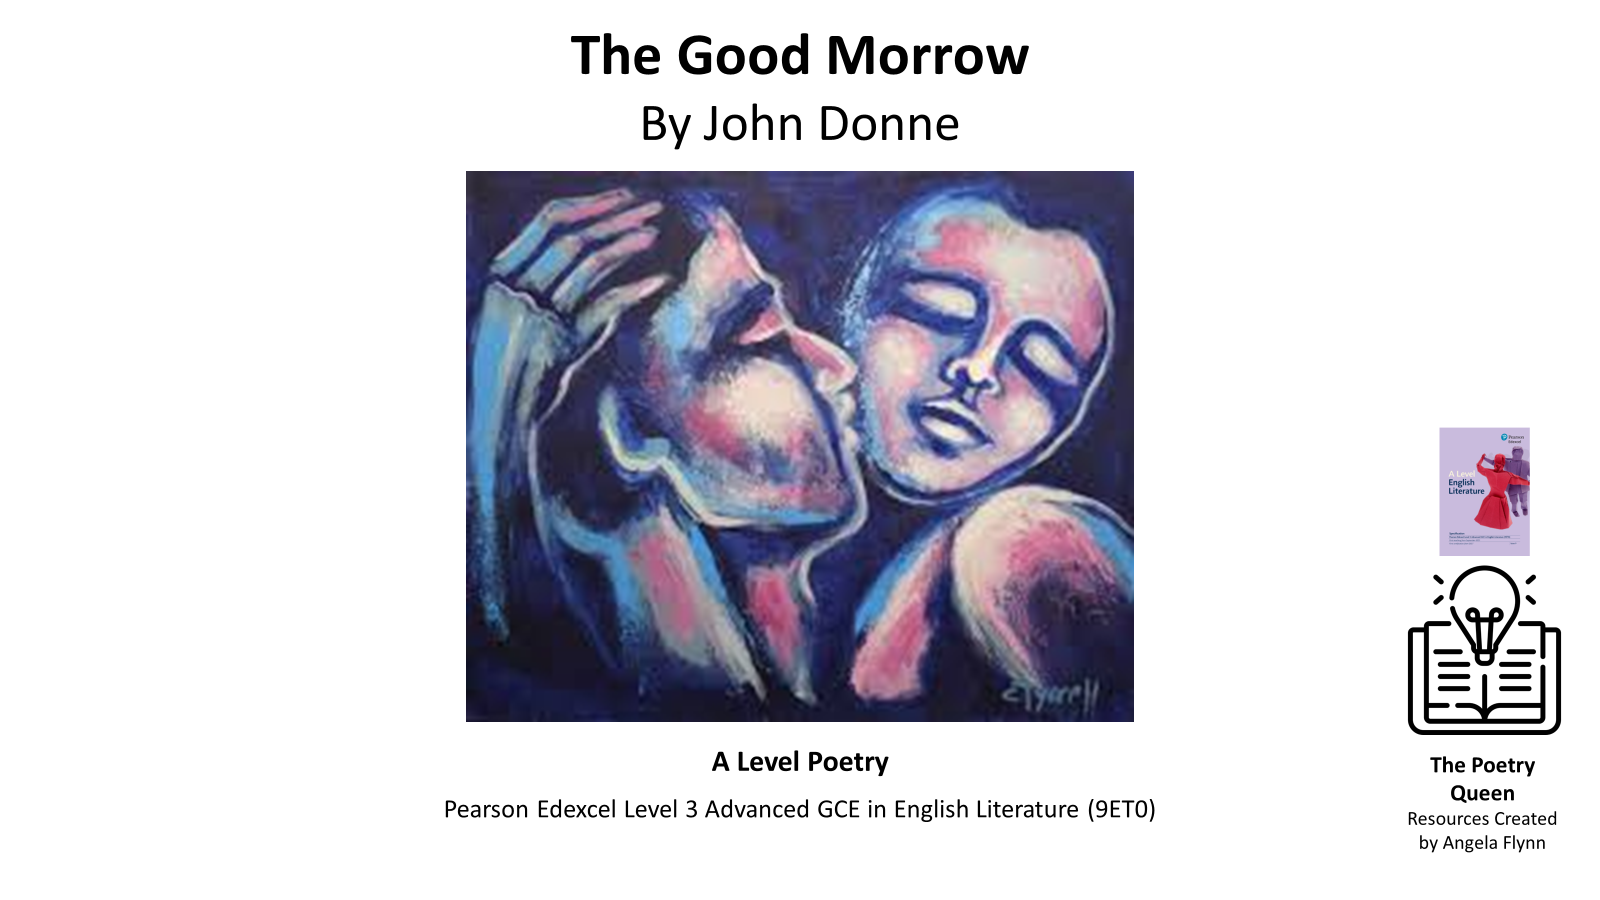 Abstract painting for John Donne's 'The Good Morrow' poem.